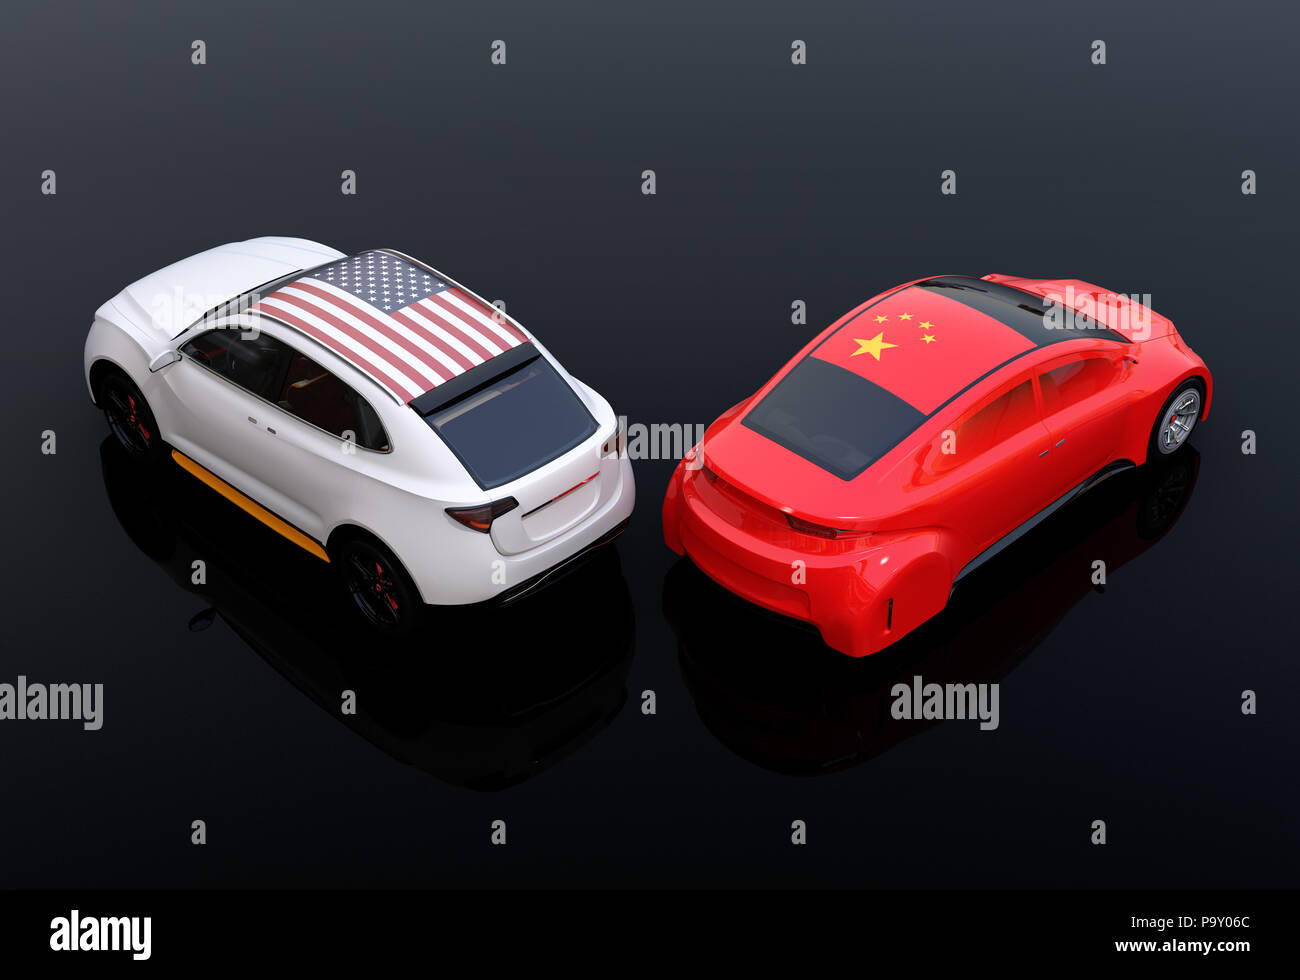 Two cars with China and US flags on the hood. black background. China USA trade war, American tariffs concept. 3D rendering image. Stock Photo